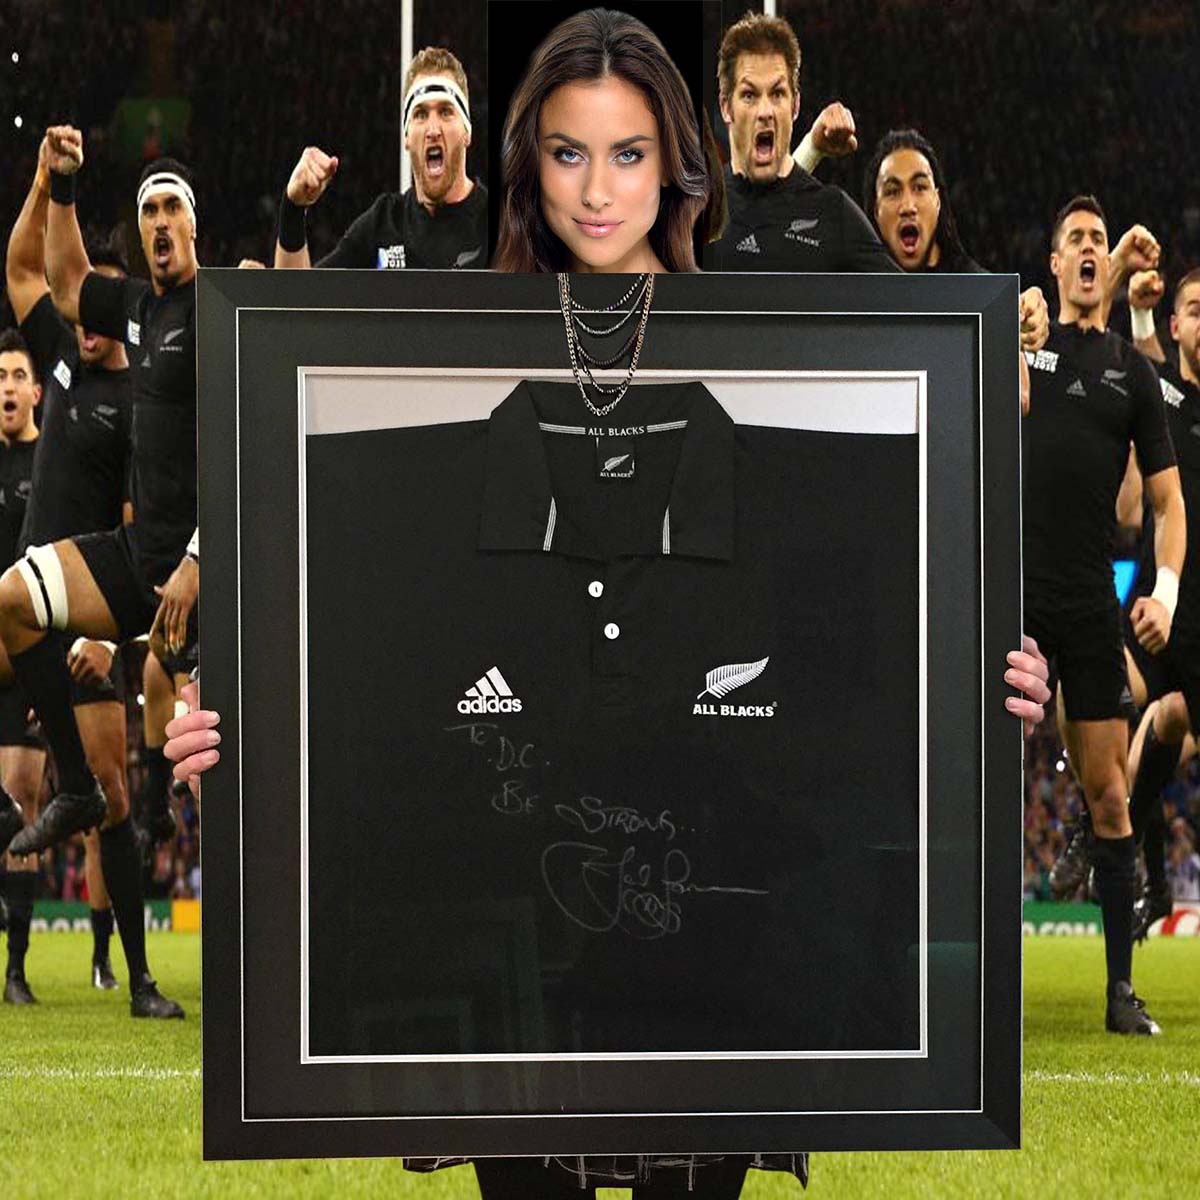 Jonah Lomu signed Jersey Frame- a very unique and valuable jersey